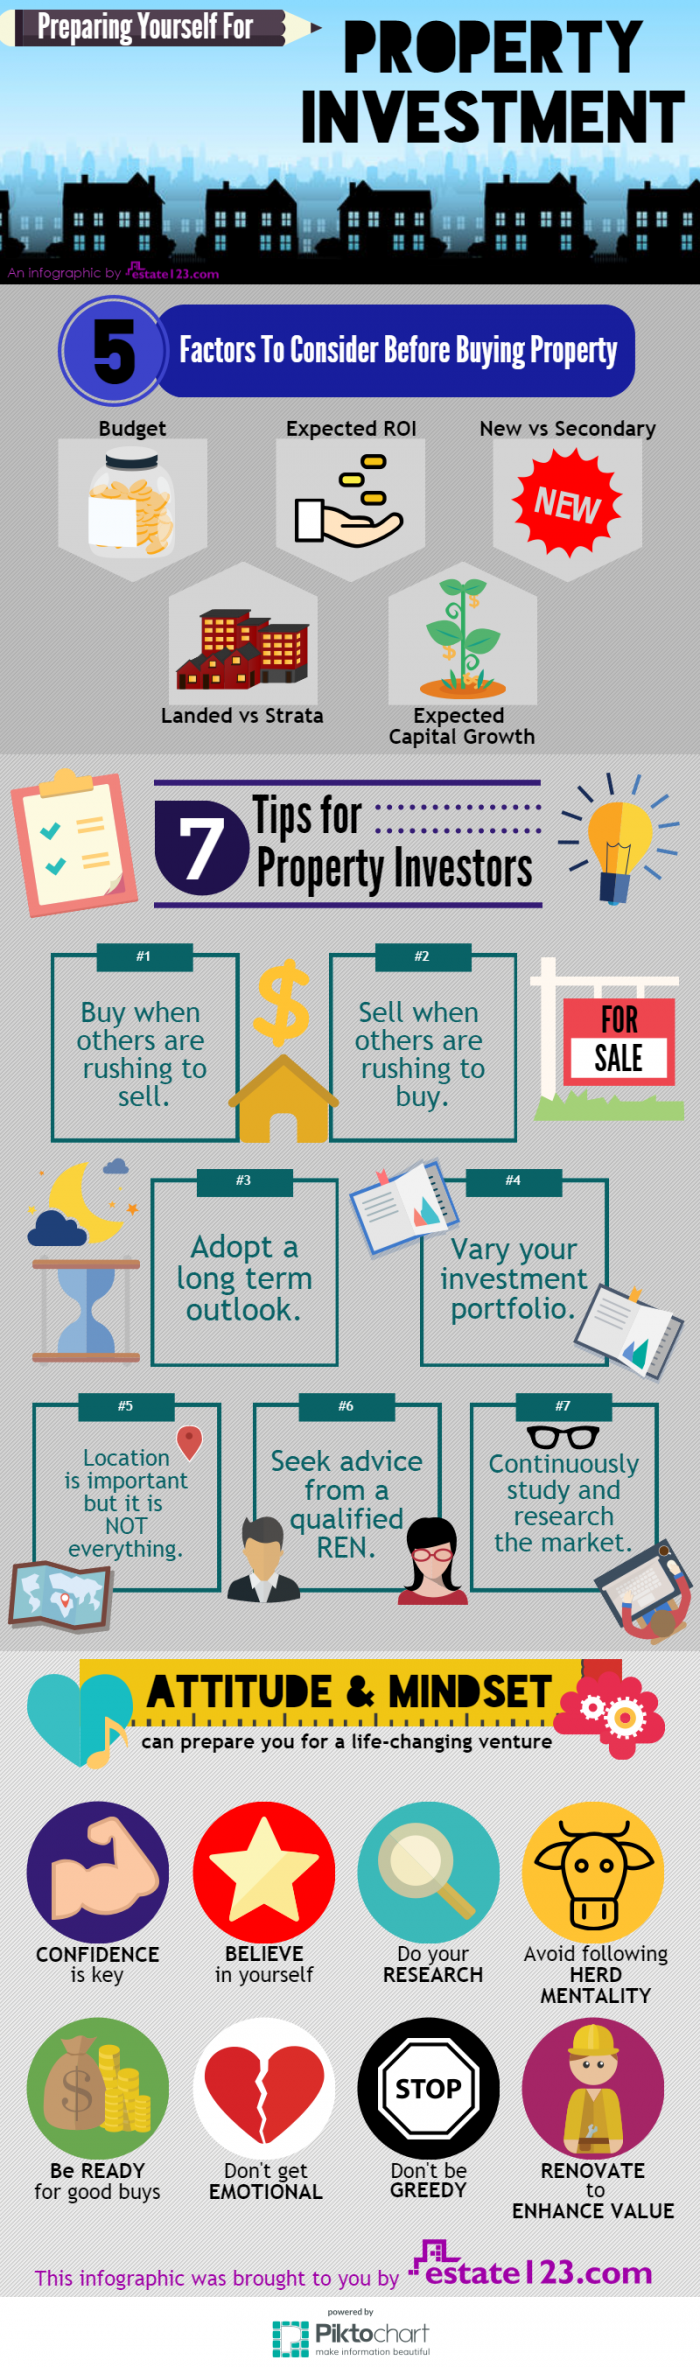 Estate123 Property Investment Infographic